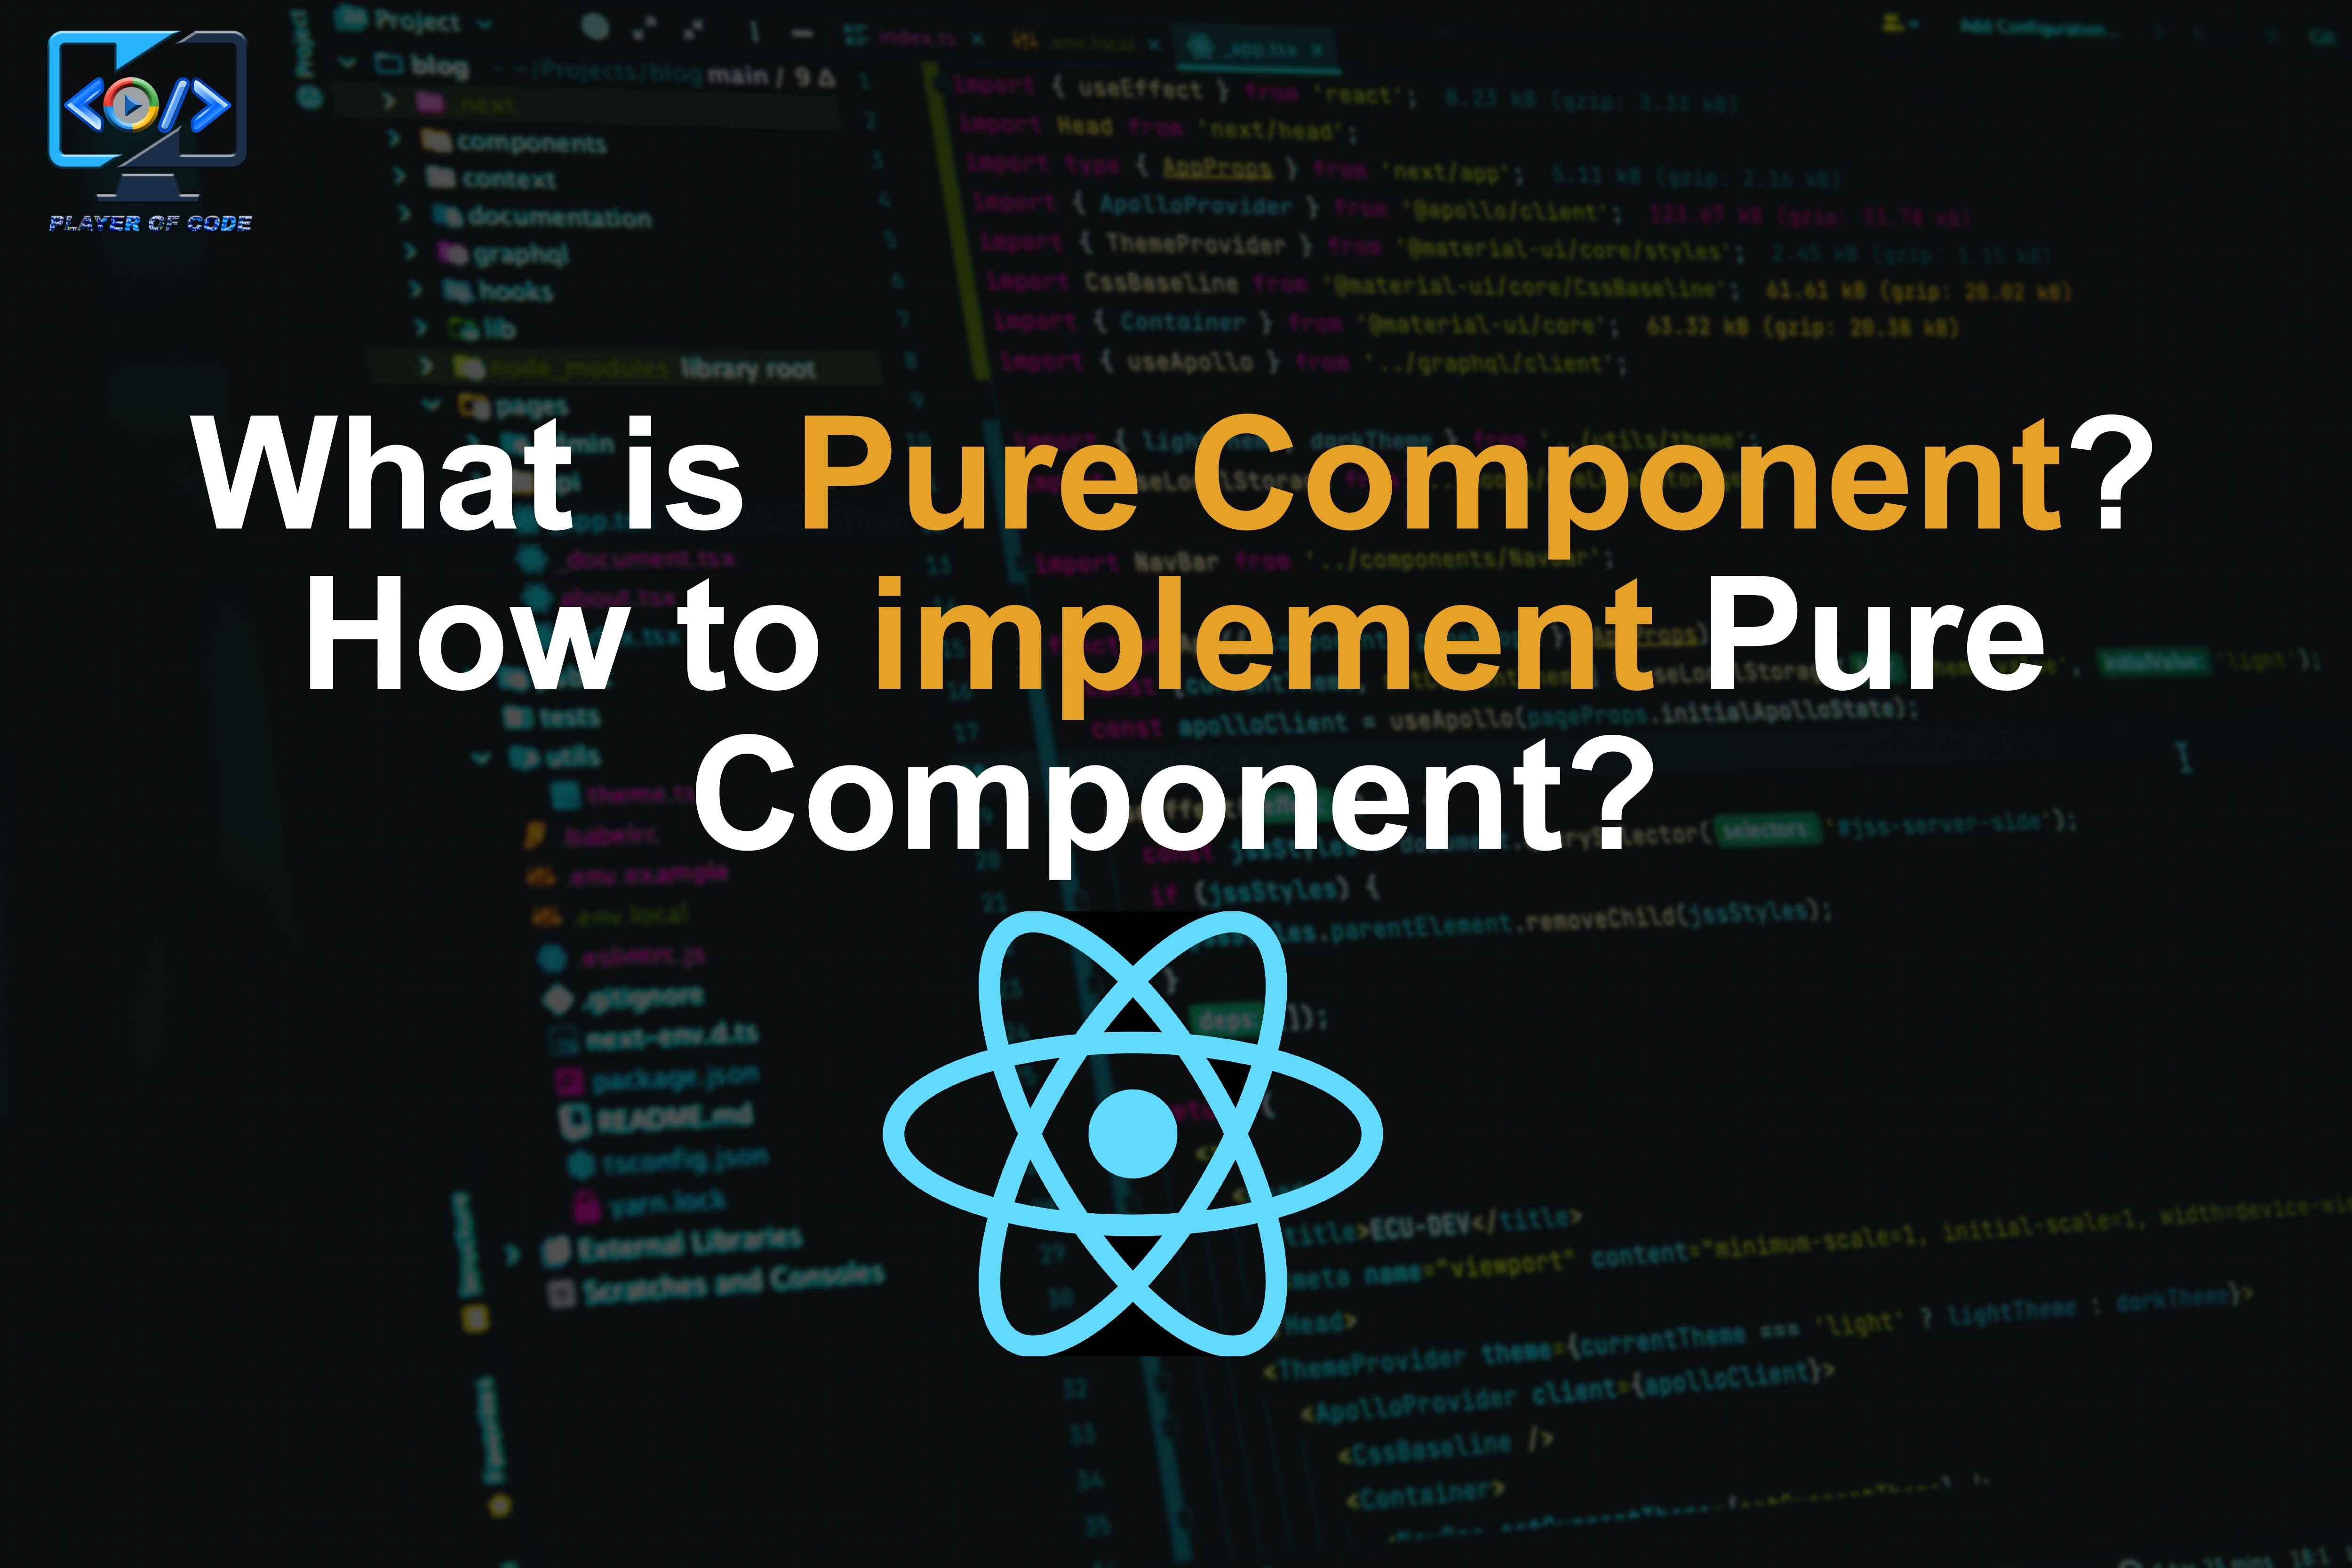 What is Pure Component? How to implement Pure Component?